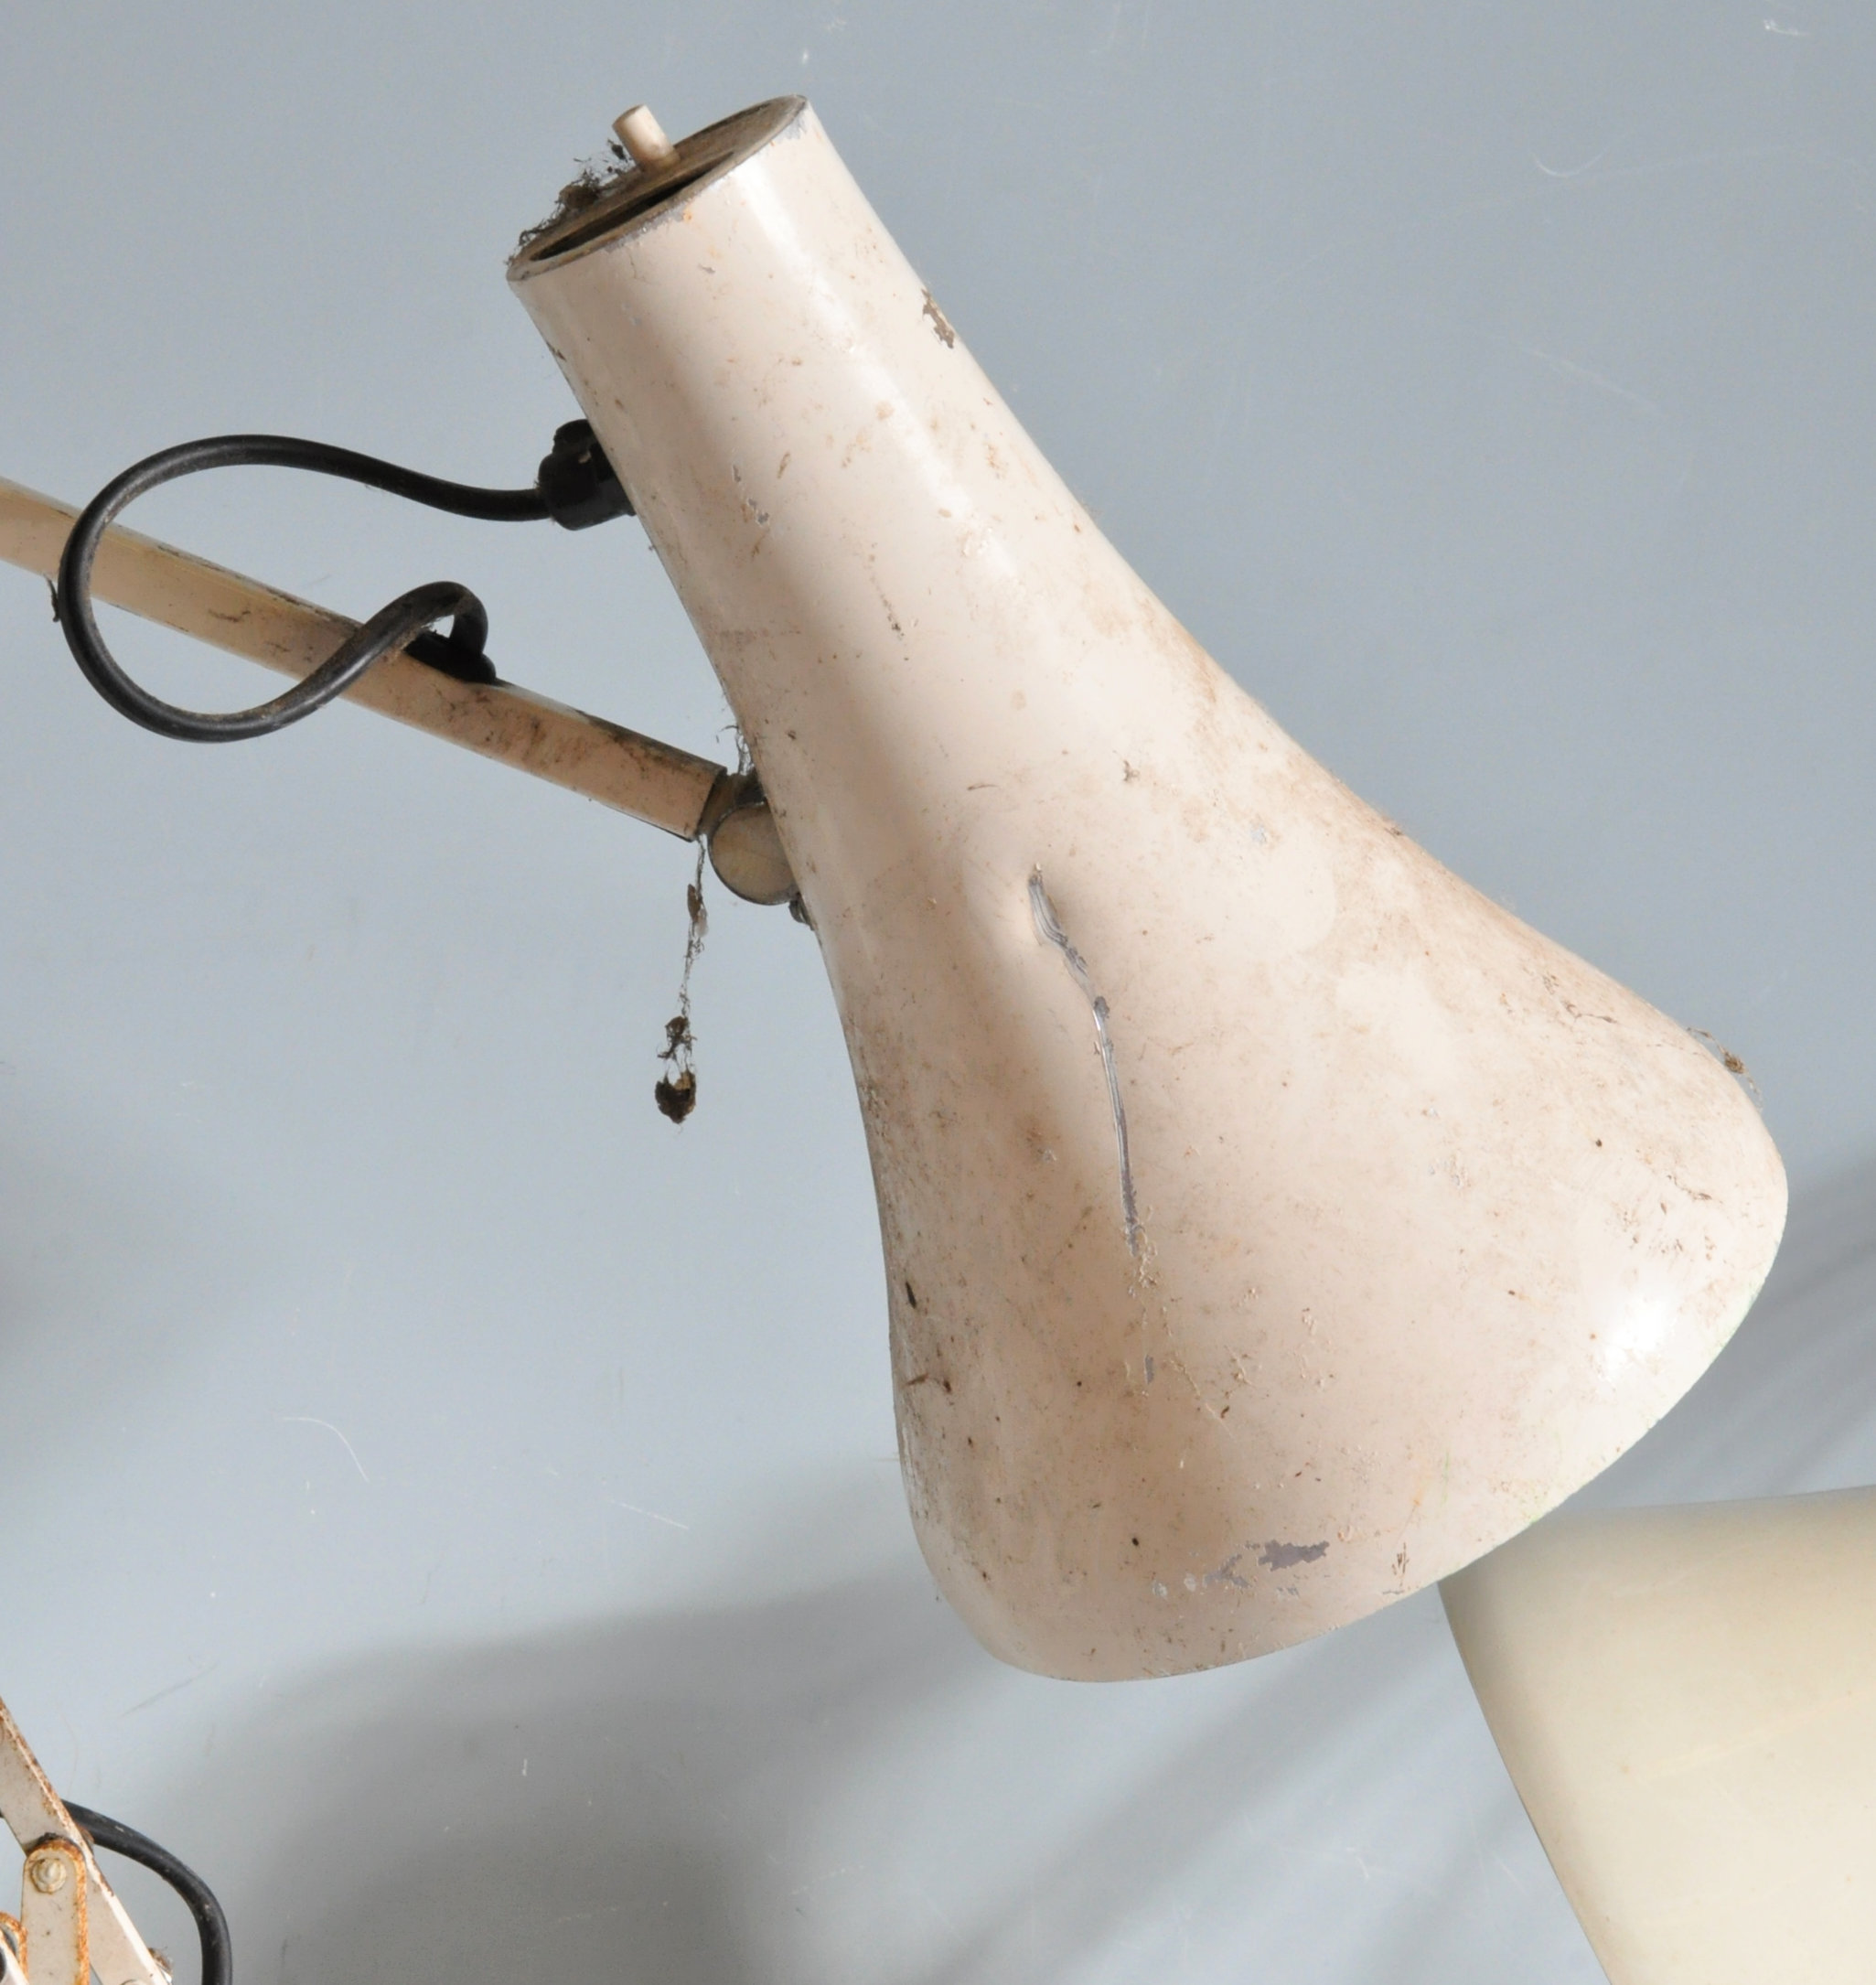 TWO VINTAGE HERBERT TERRY ANGLEPOISE DESK LAMPS - Image 3 of 7